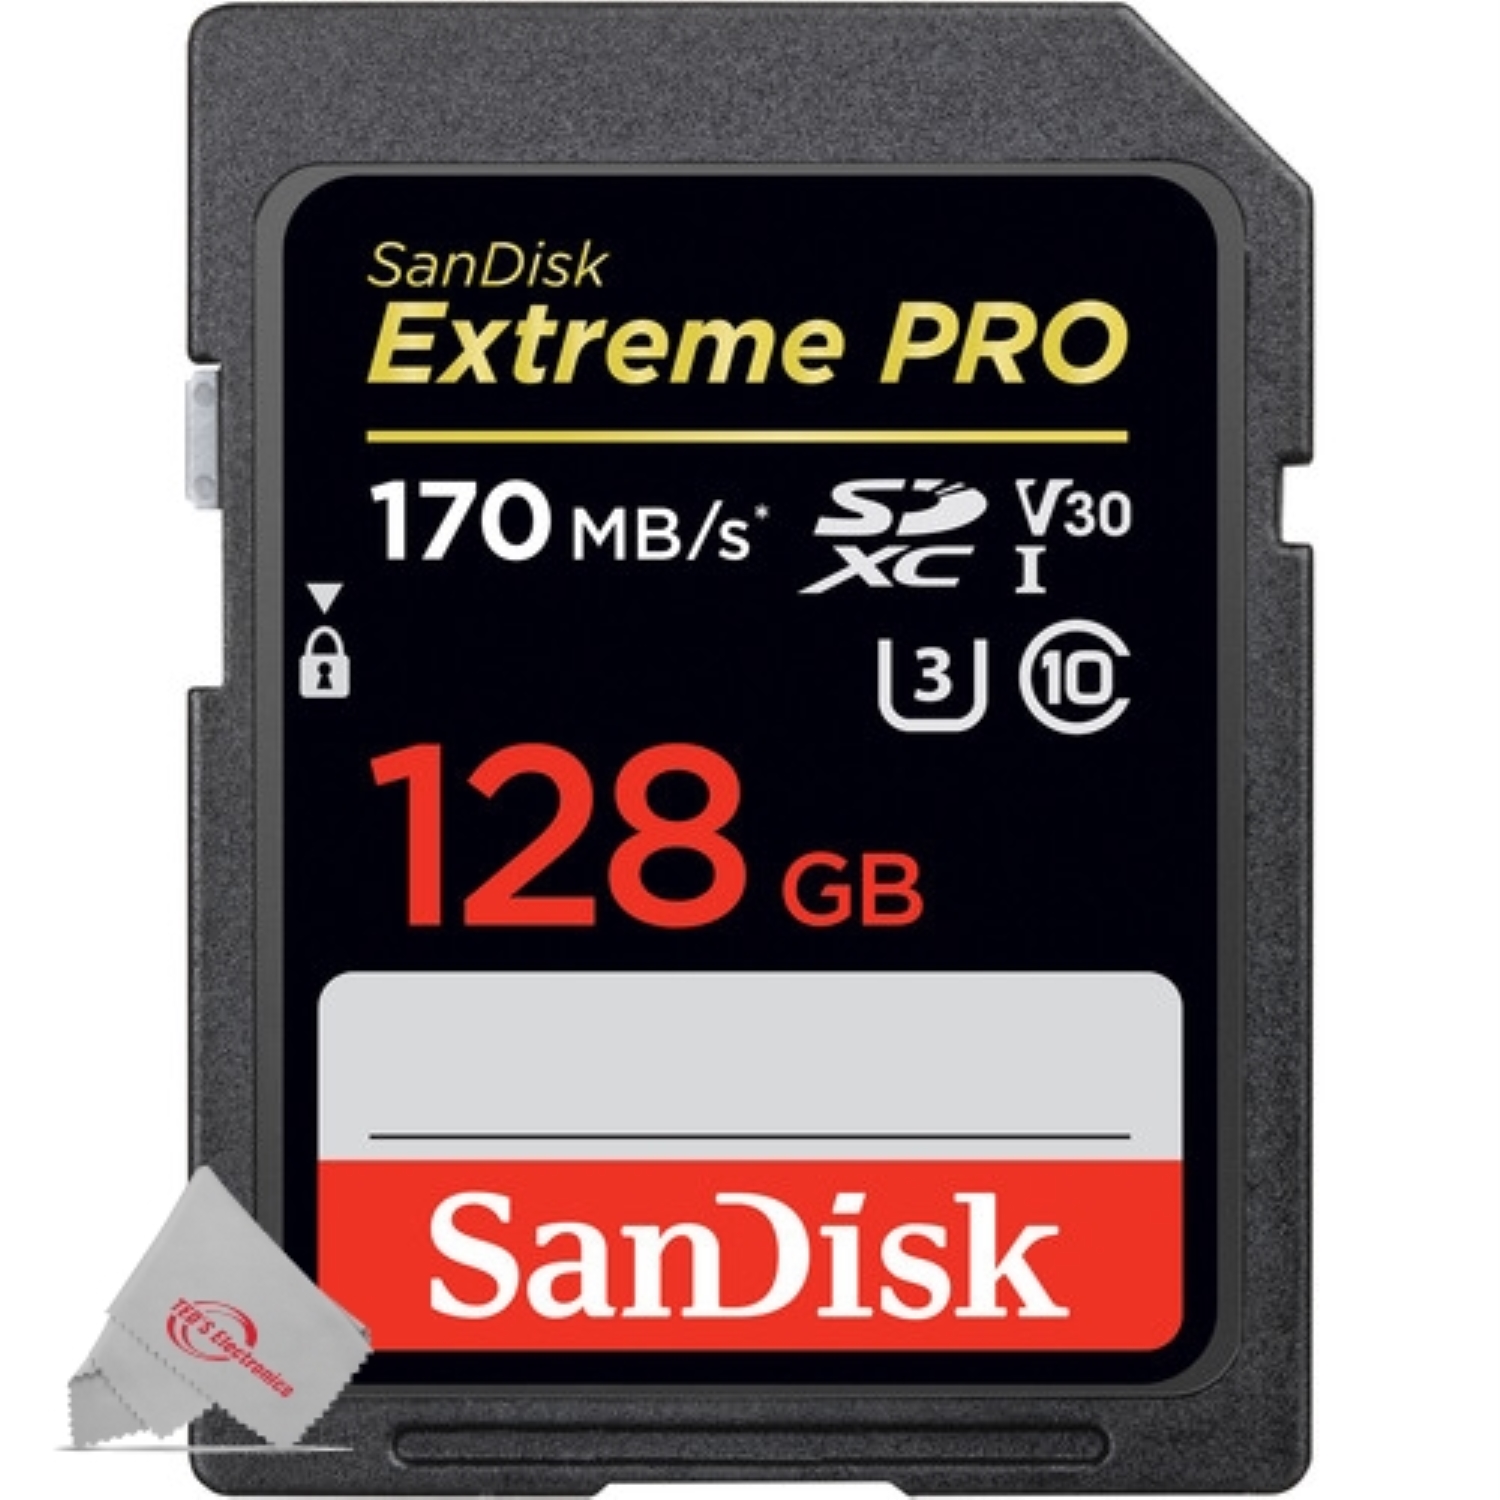 5x SanDisk Extreme Pro 128GB SDXC UHS-I/U3 V30 Class 10 Memory Card, Speed Up to 170MB/s (SDSDXXY-128G-GN4IN) - image 3 of 3